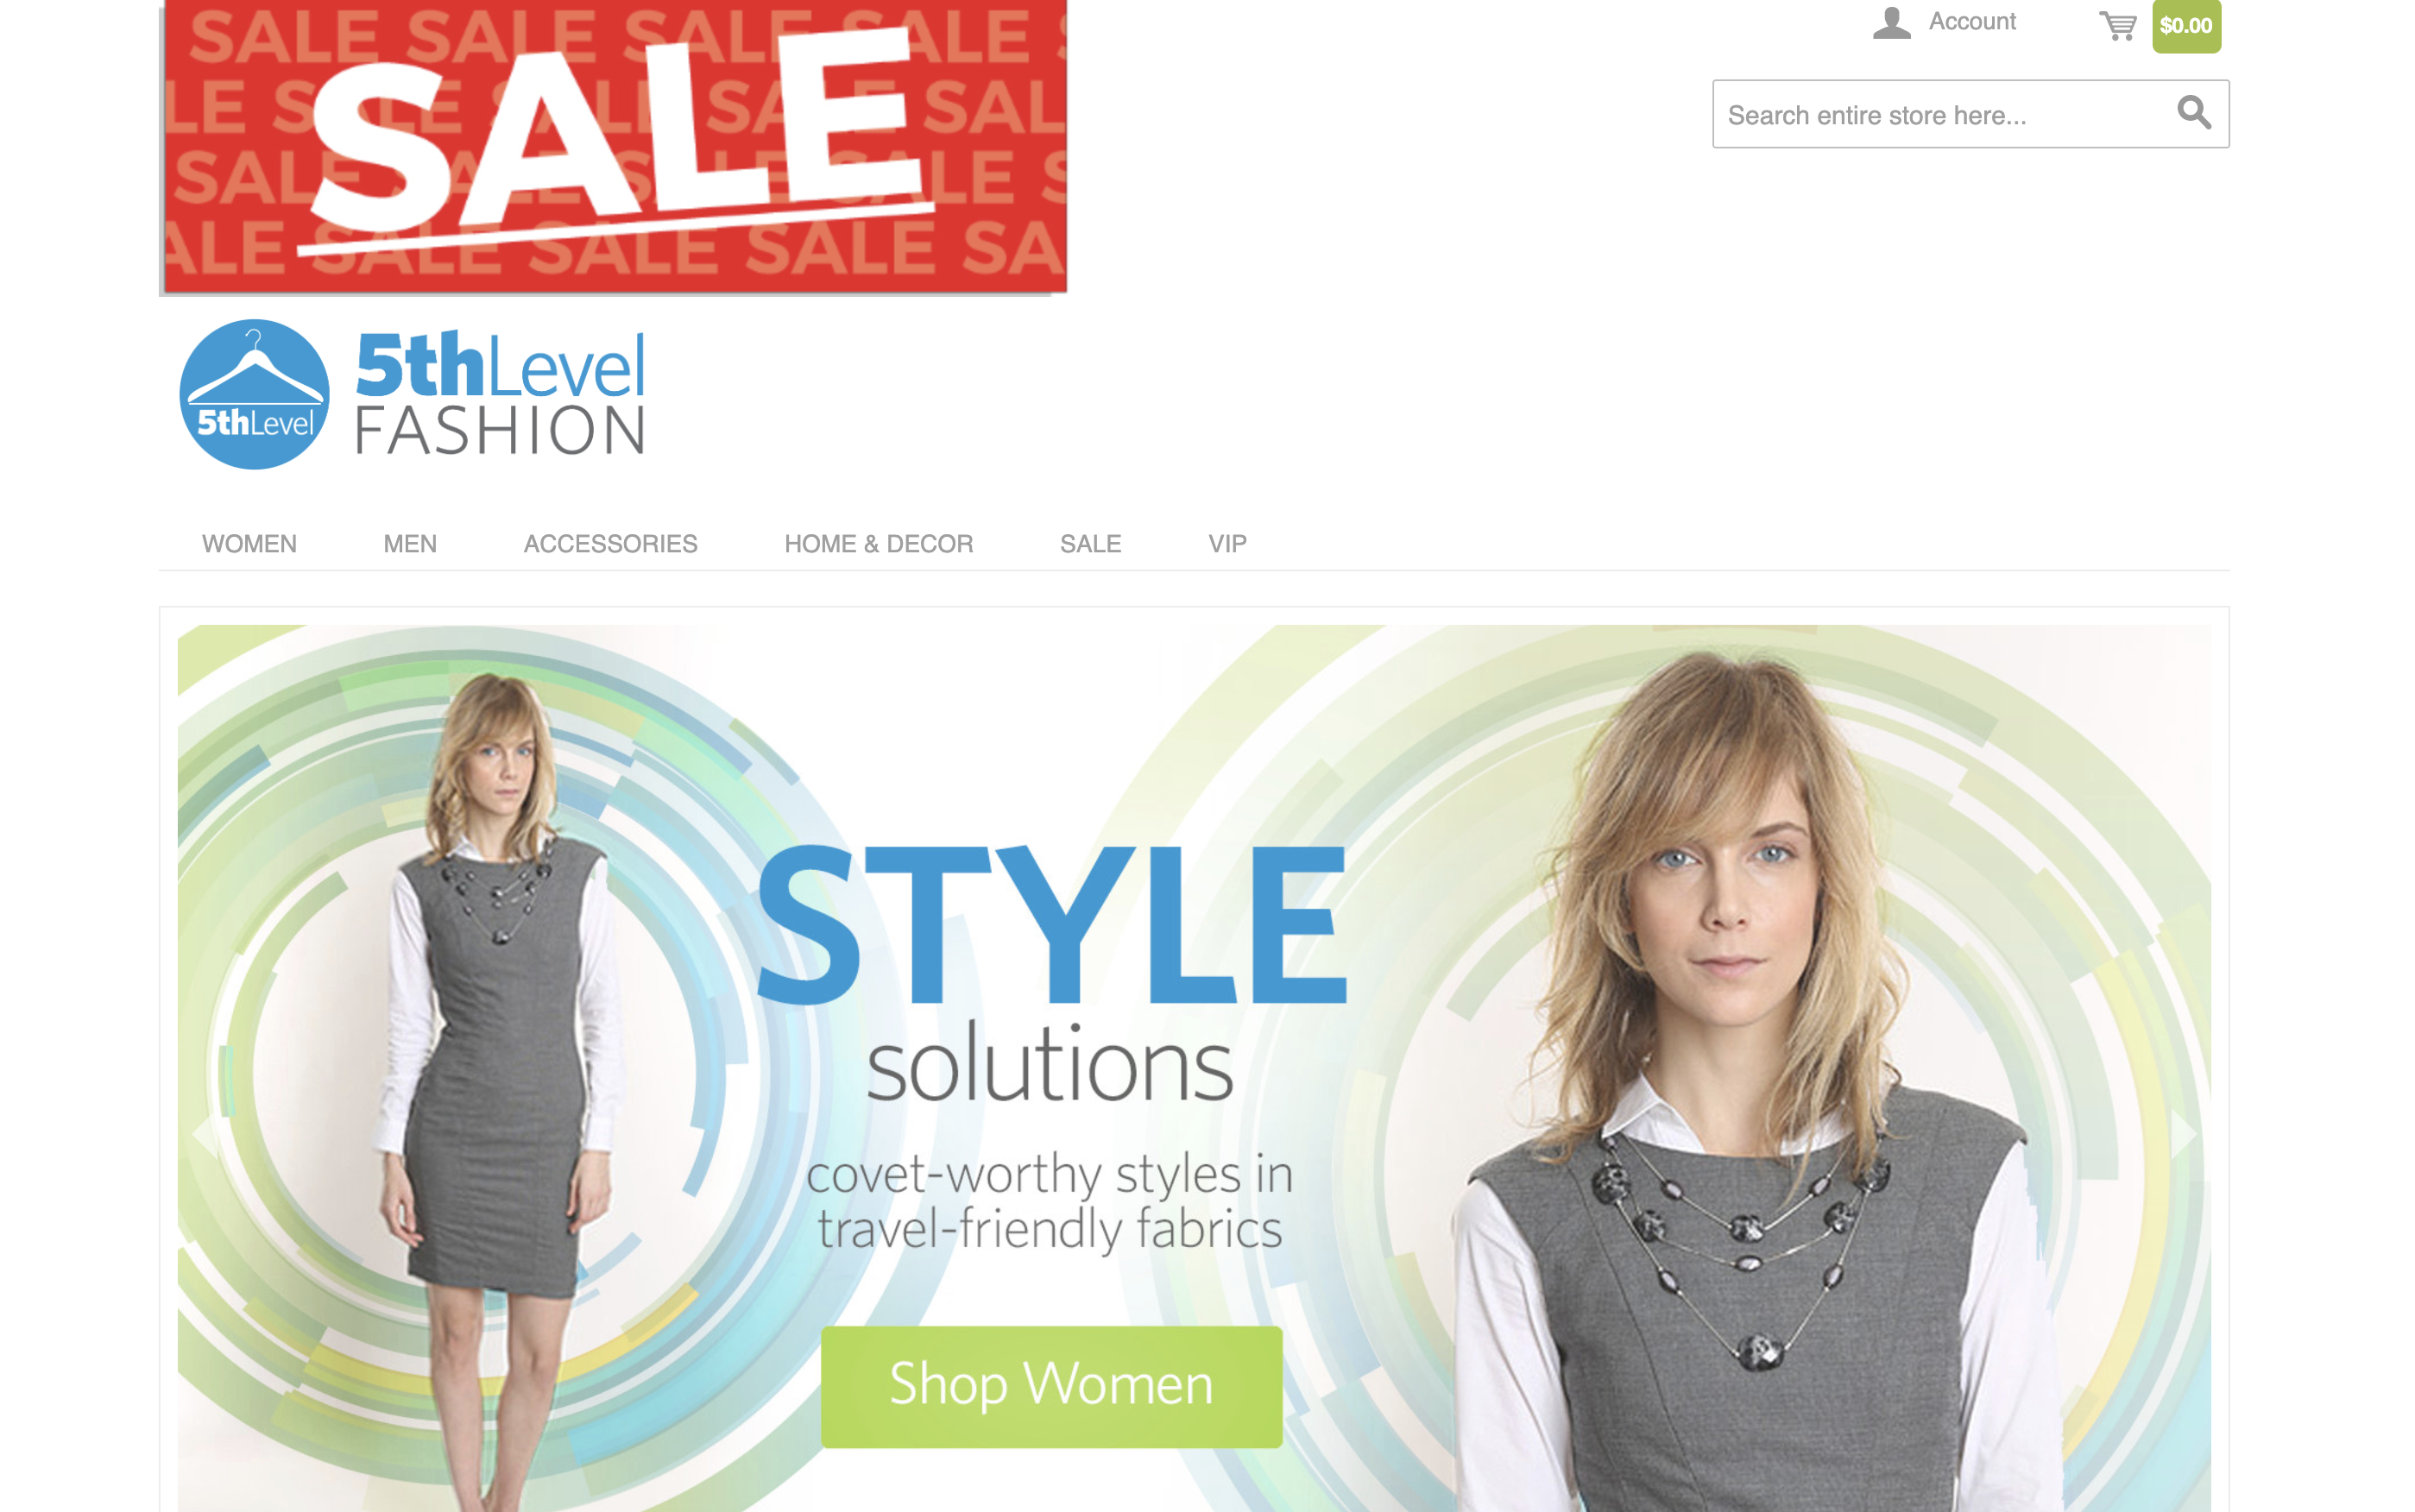 Example of an online retailer's home page